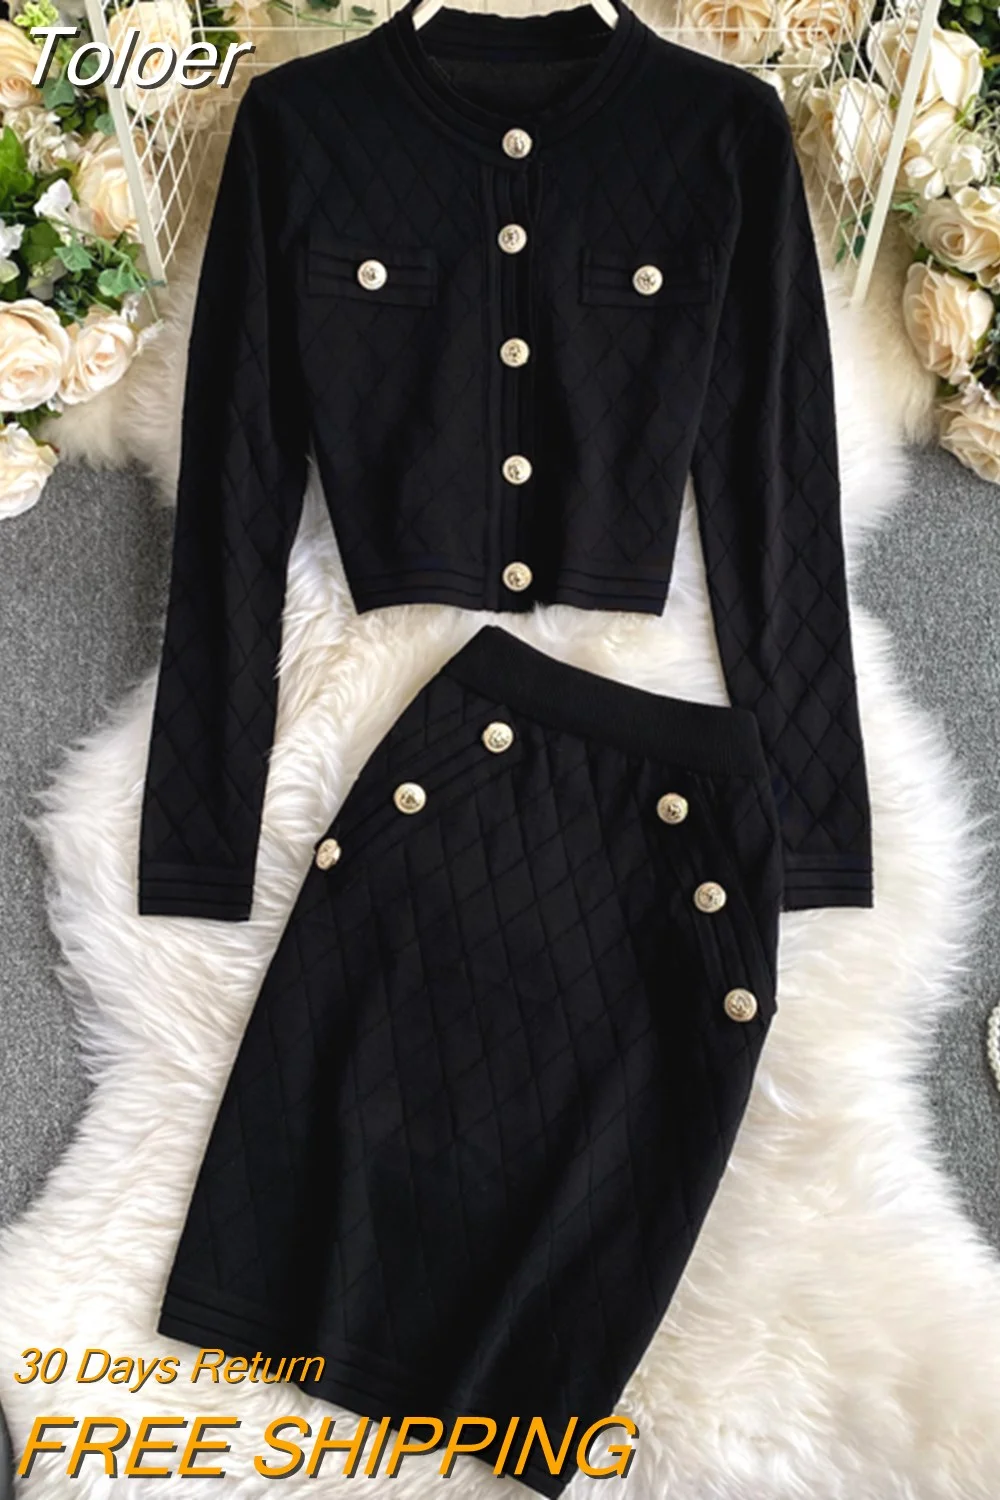 Toloer long sleeve buttons sweater top and skirt suits women knitted two piece set New autumn fashion ladies club outfits